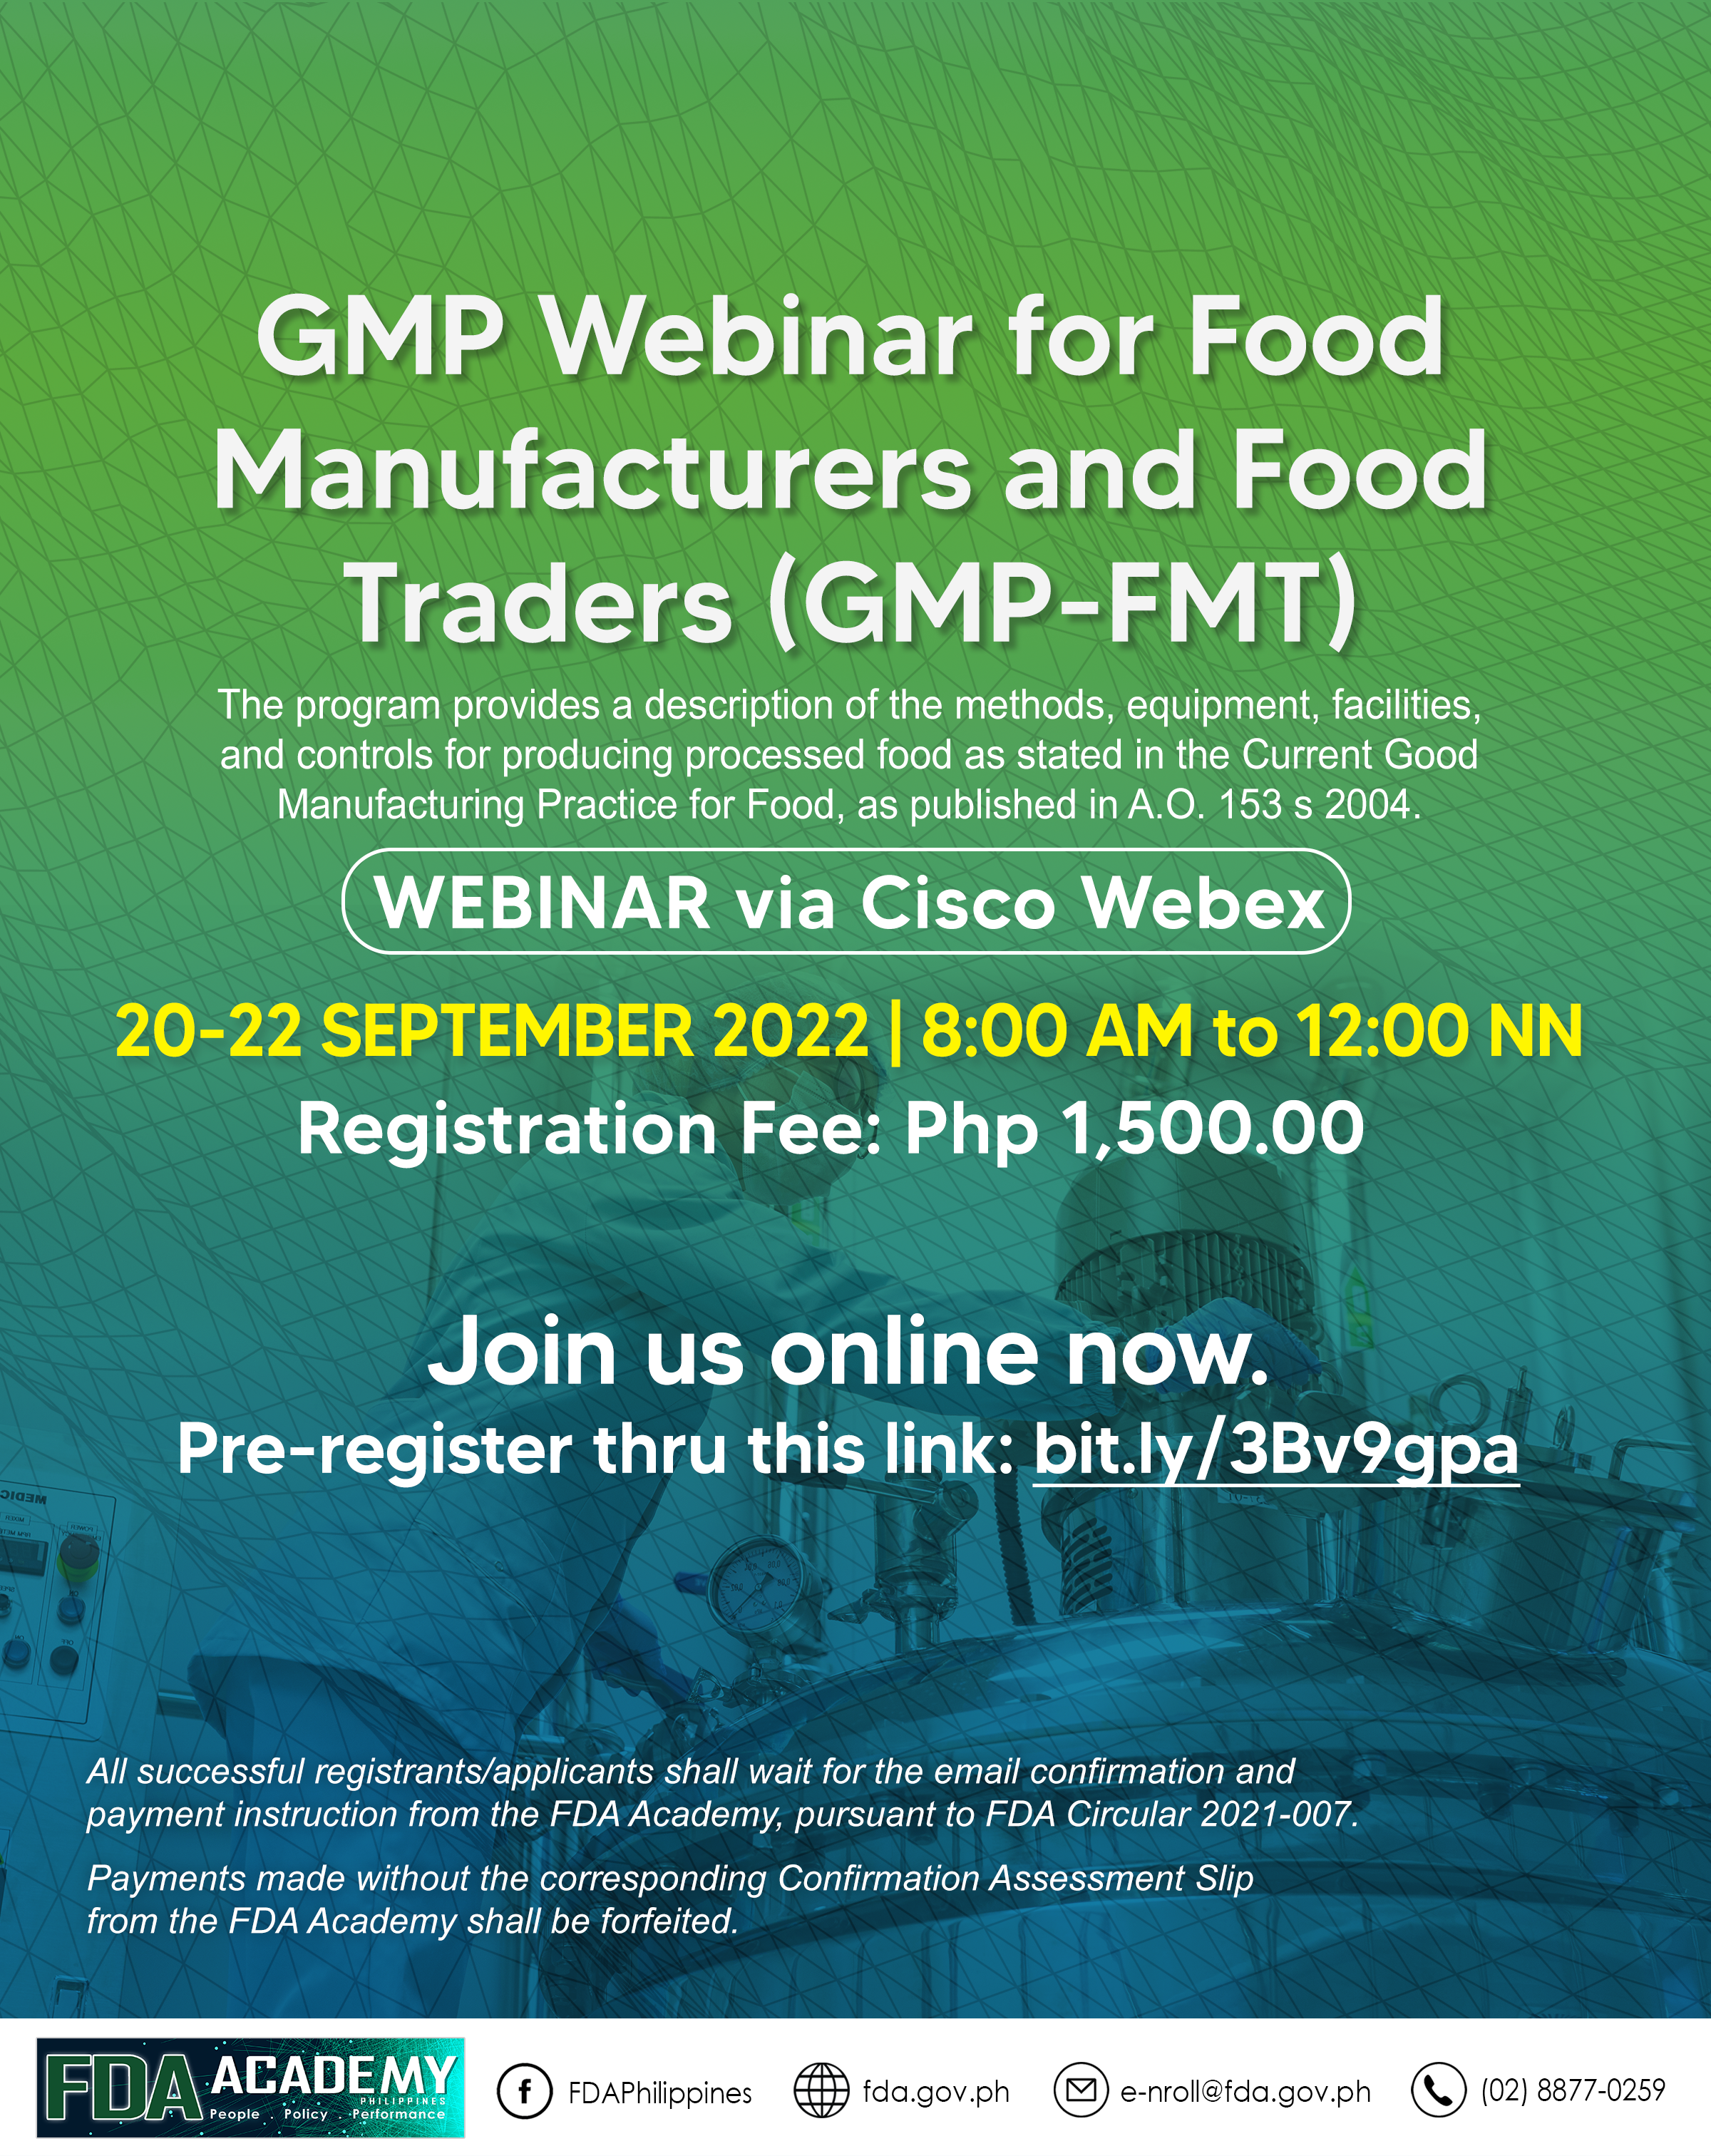 Announcement || GMP WEBINAR FOR FOOD MANUFACTURERS AND FOOD TRADERS (GMP-FMT)